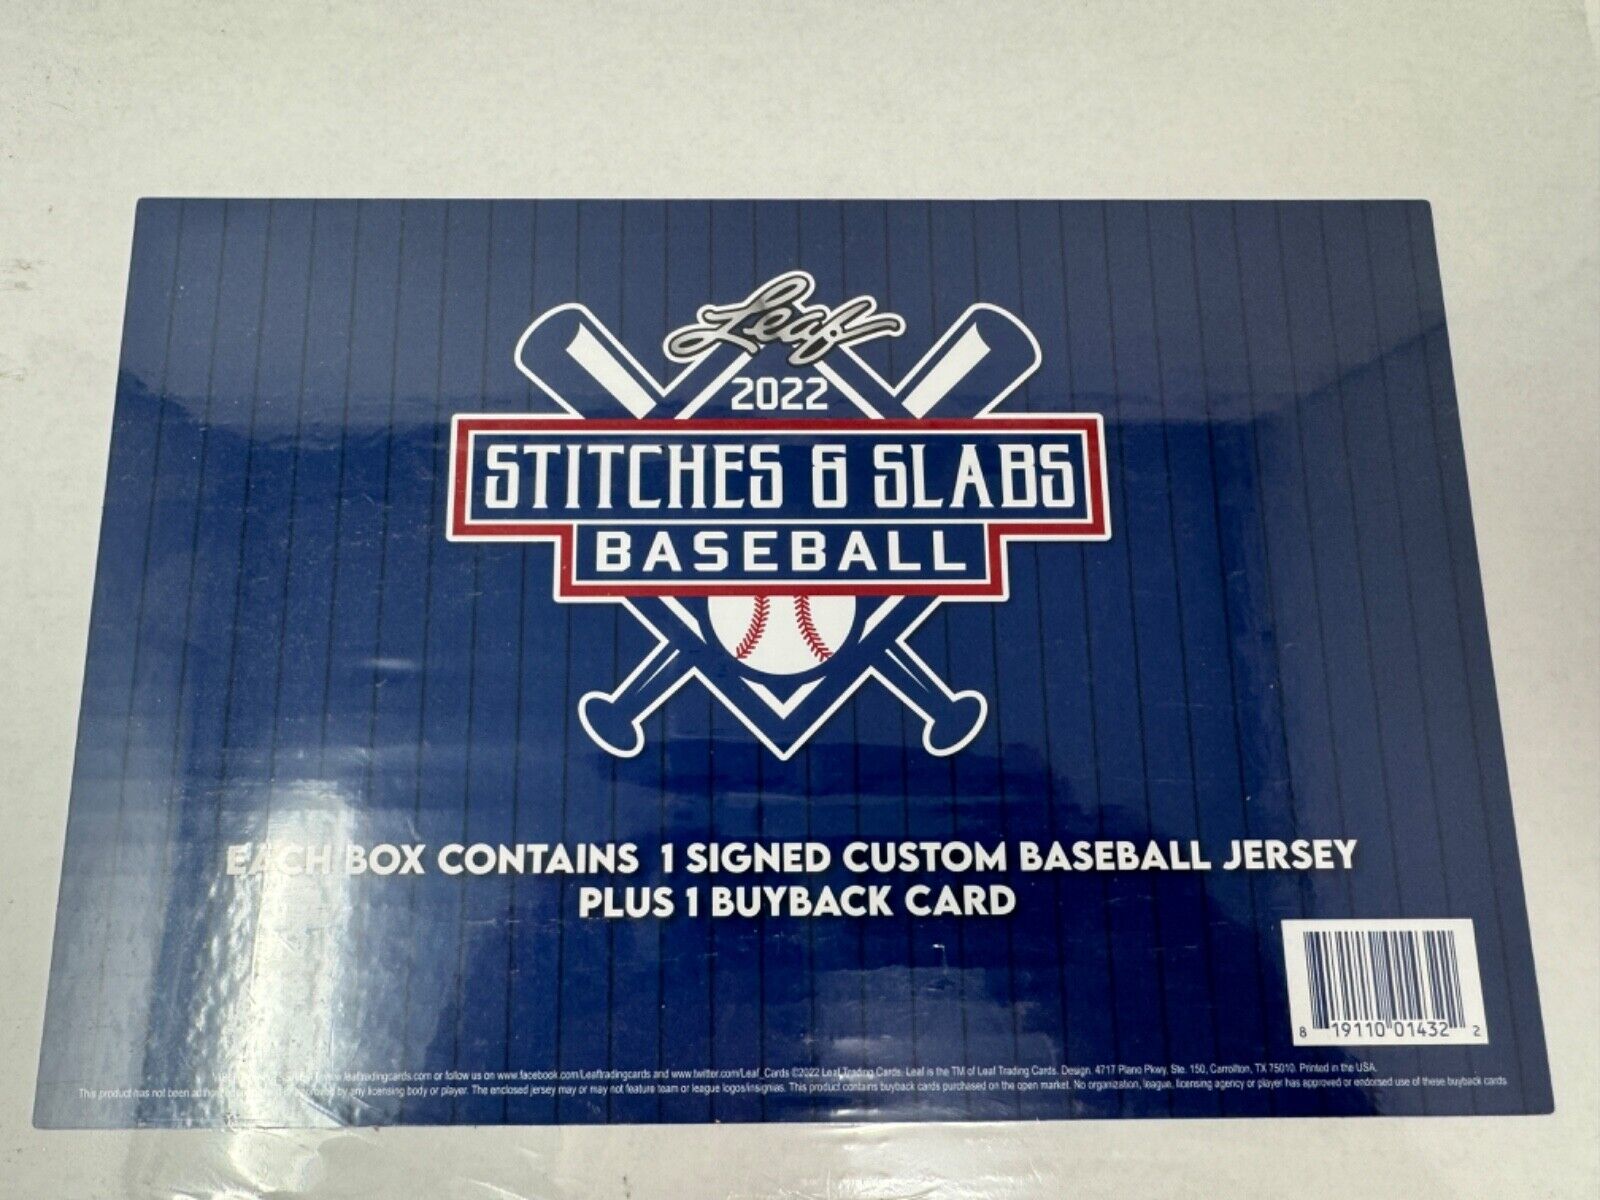 2022 Leaf Stitches and Slabs Baseball Box (Mystery Jersey + Card) -GREAT PRODUCT